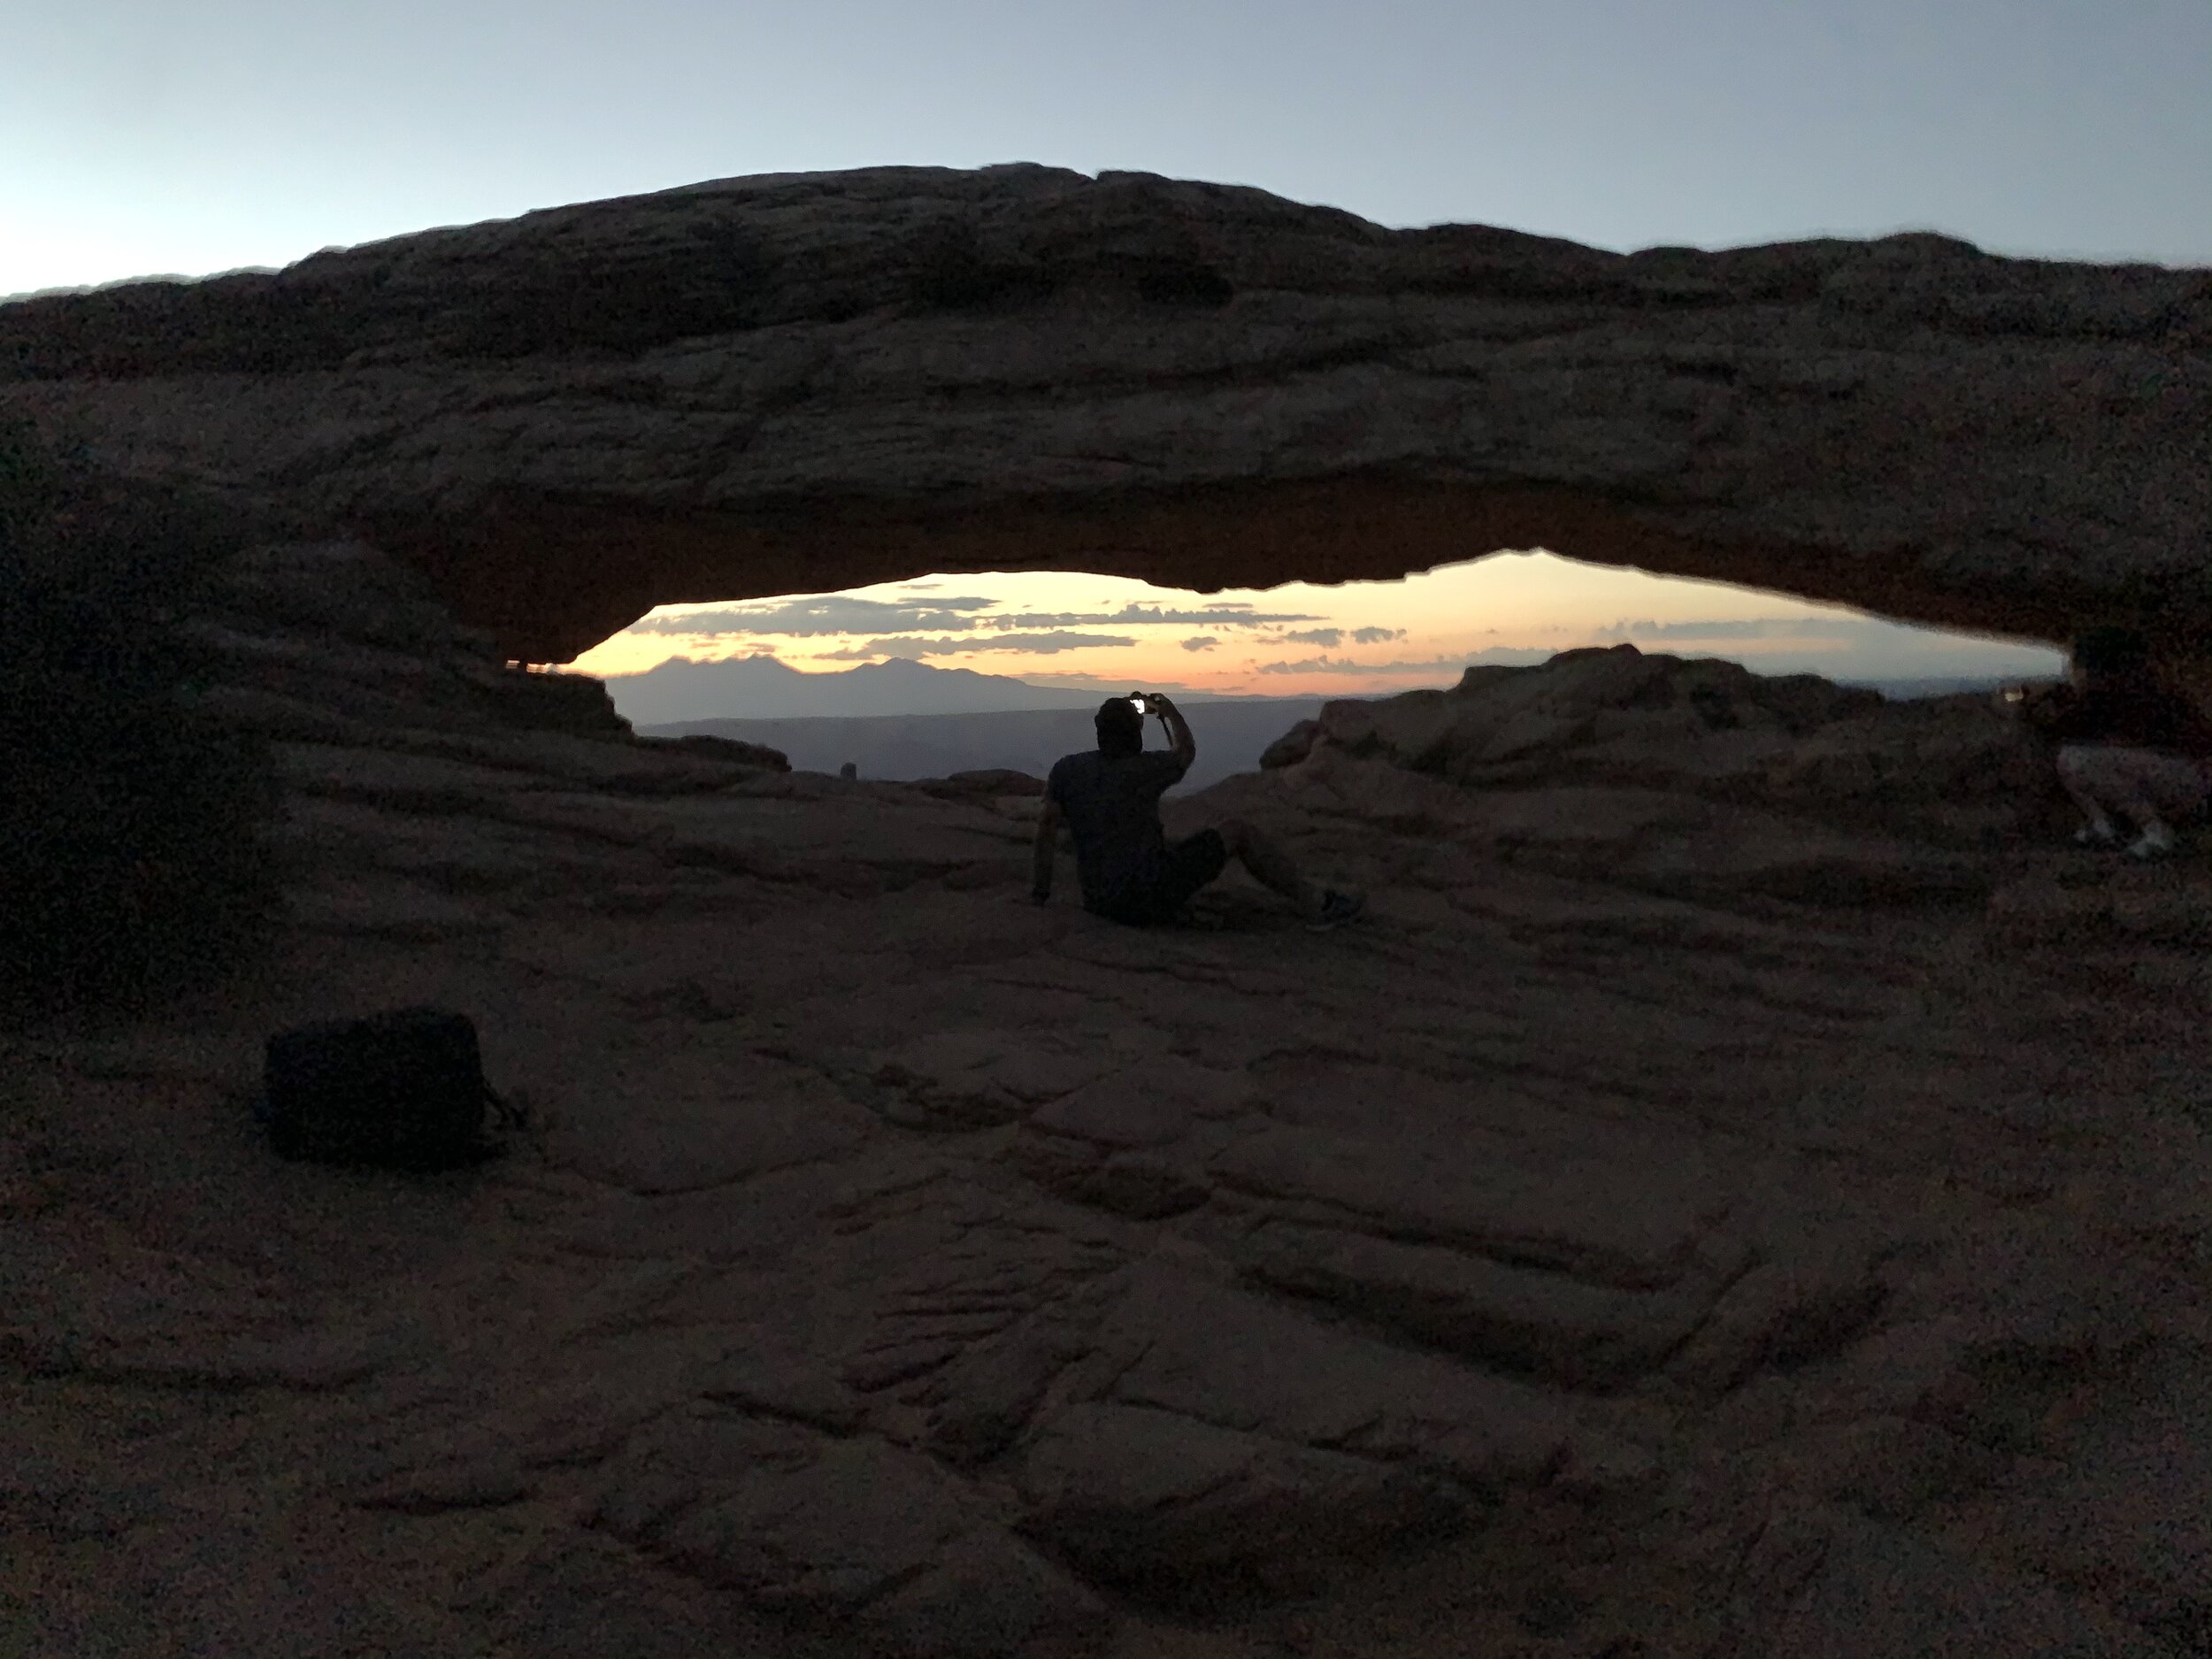  This morning we set out at 4 am for sunrise pictures of Mesa Arch in Canyonlands. Craig was there in plenty of time to set up his camera. Clay and I tried to sleep beside a rock as we waited.😴 